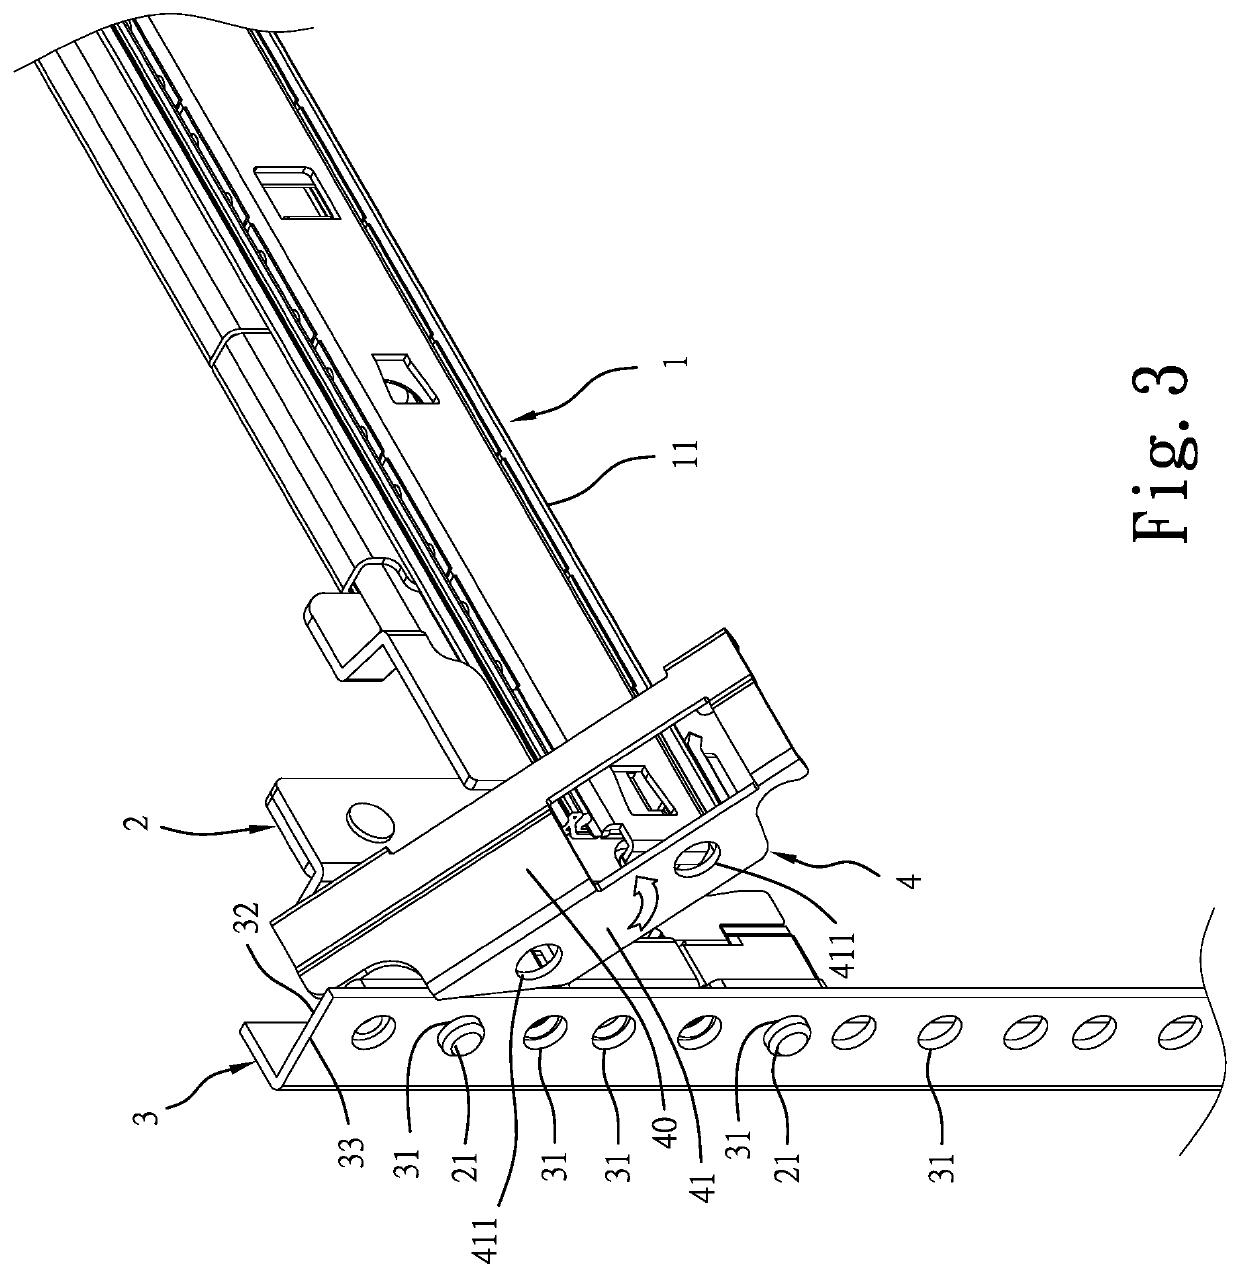 Server rail and server rack mounting structure